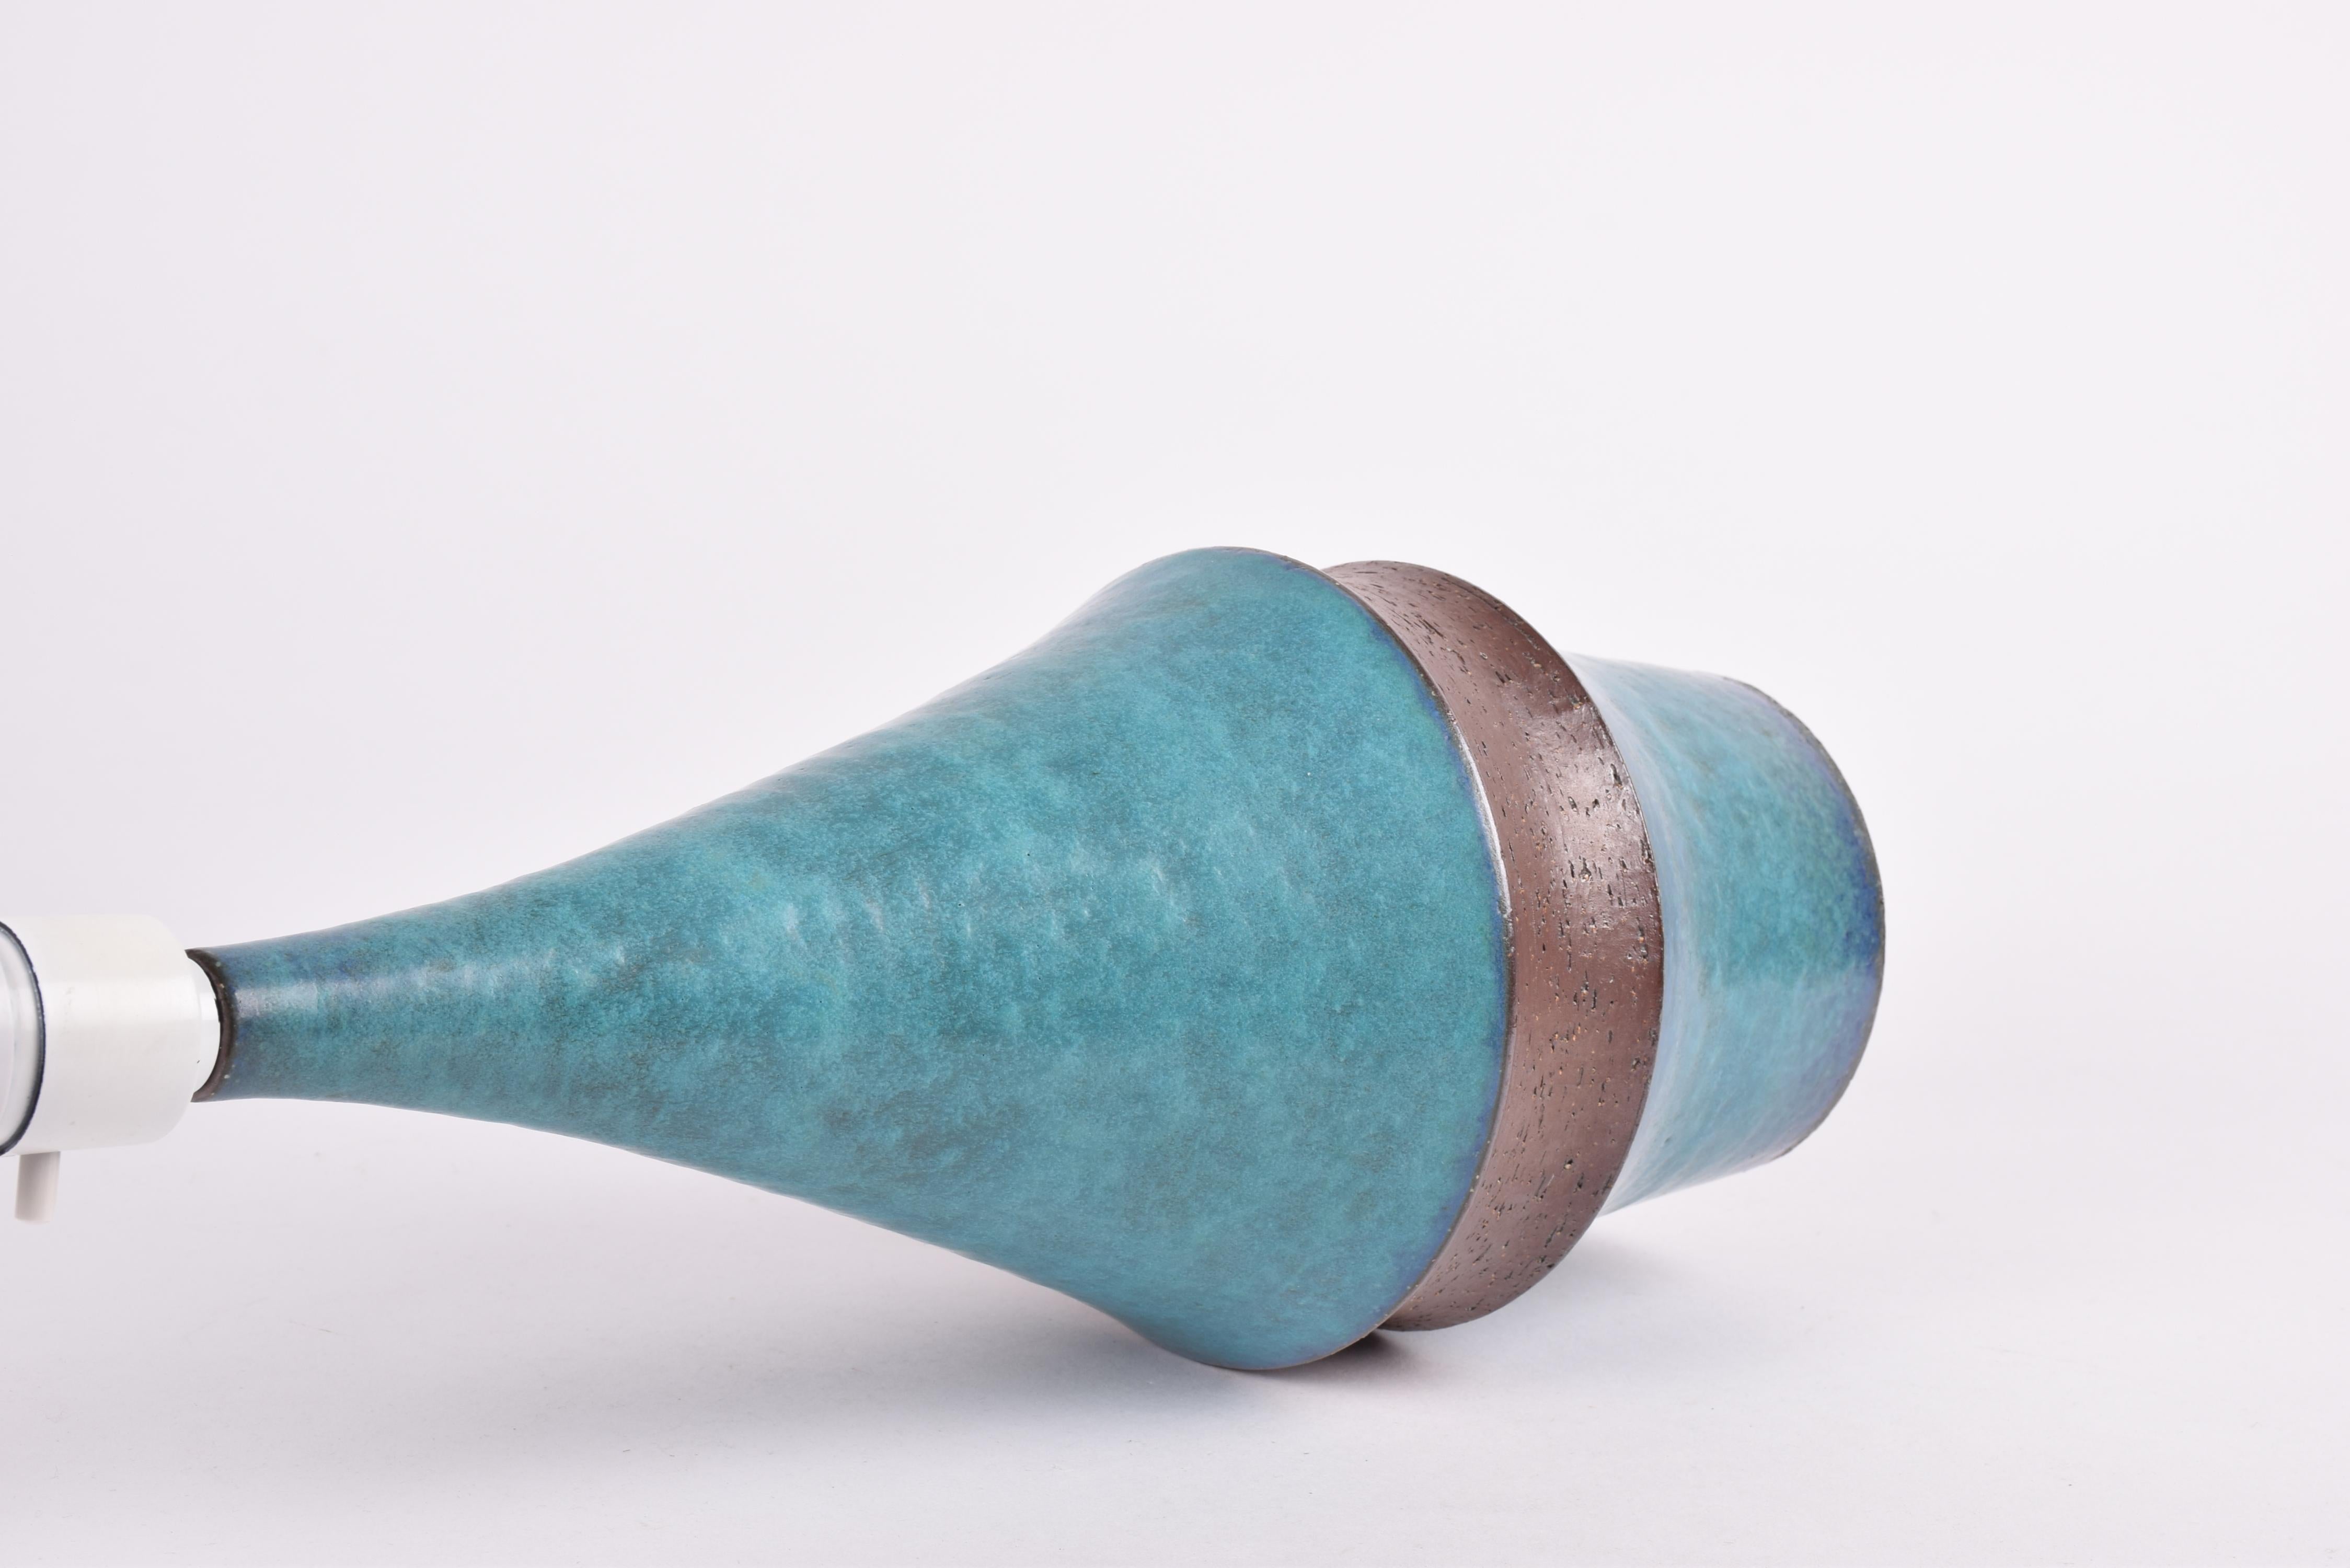 Ceramic Marianne Starck for Michael Andersen & Søn Tall Table Lamp Turquoise Brown 1960s